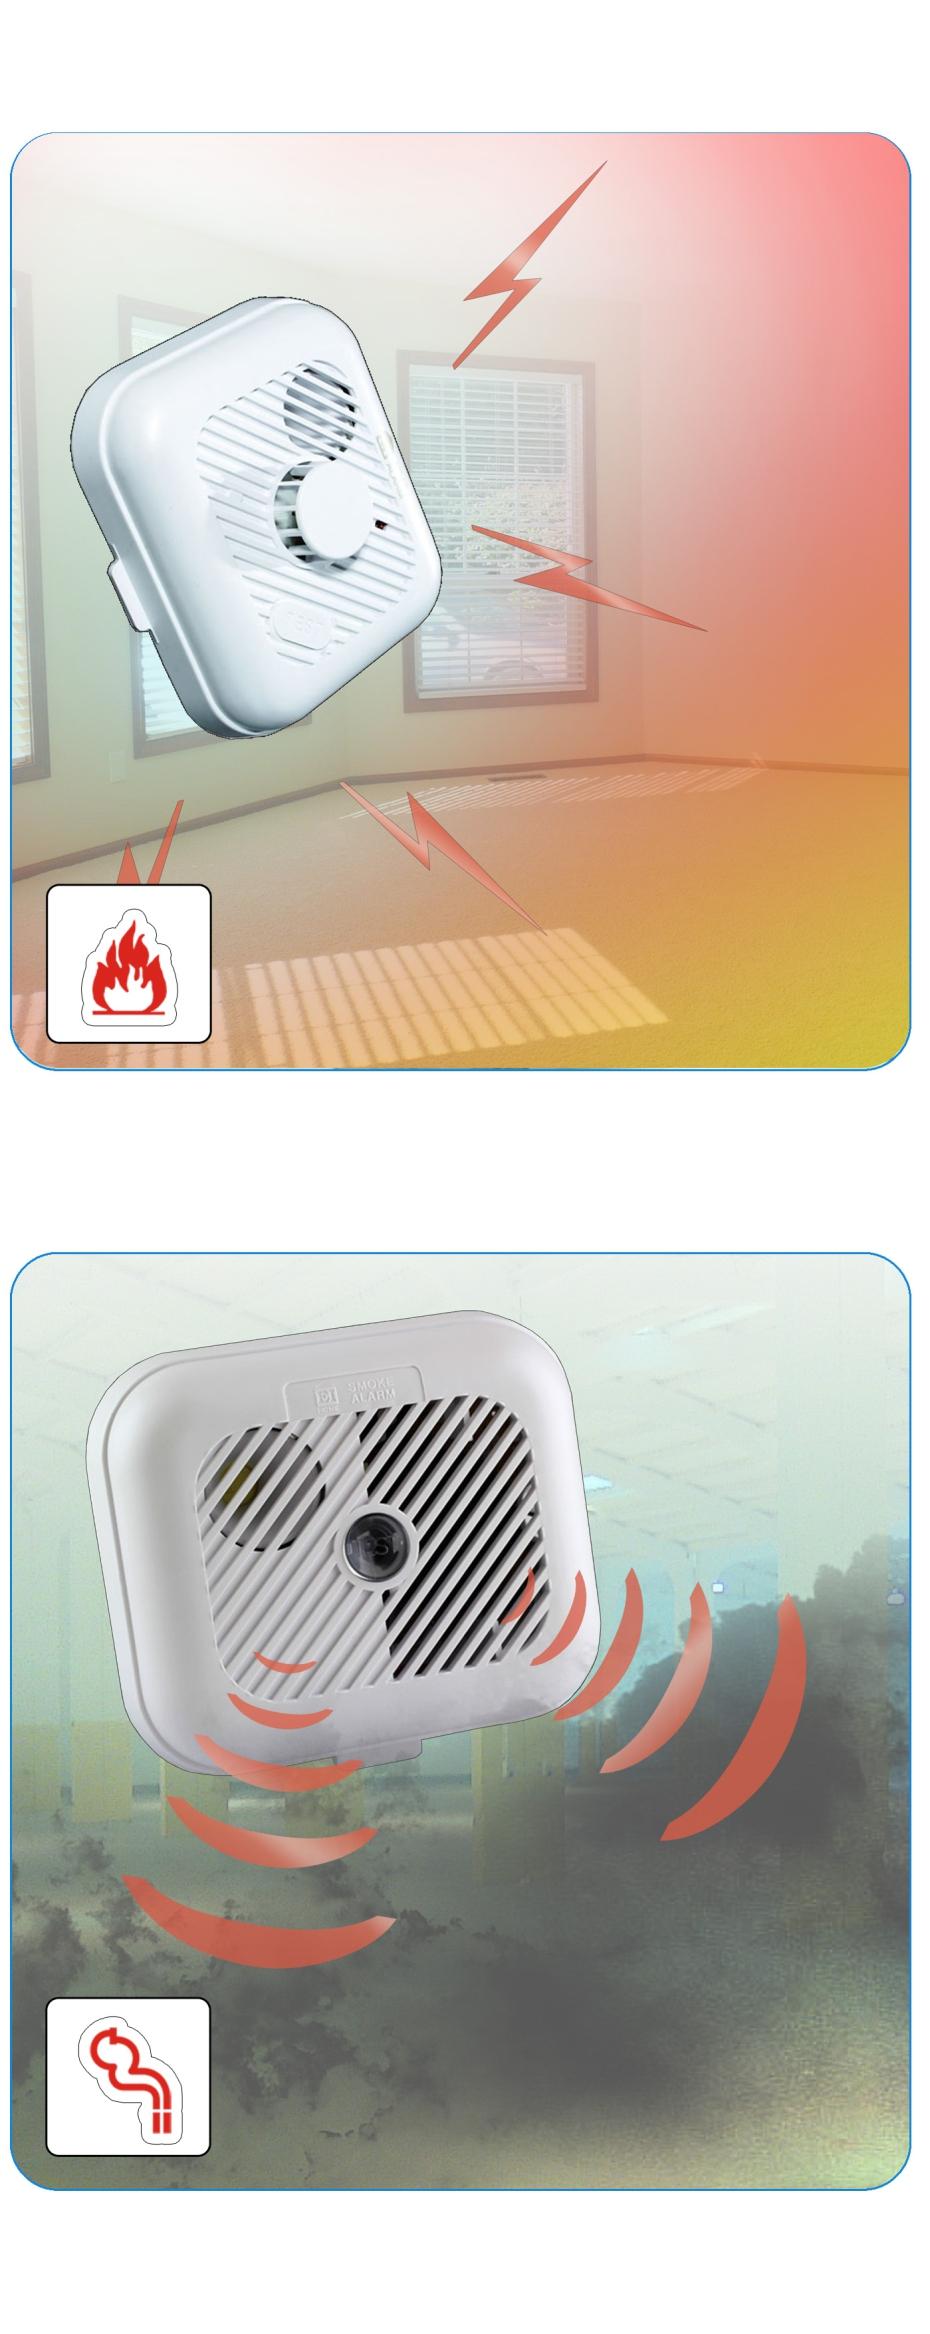 Heat Sensor The heat detector is used in rooms where smoke or mist are present in the working environment, such as kitchens or garages. Ionisation or optical smoke detectors would not be effective.